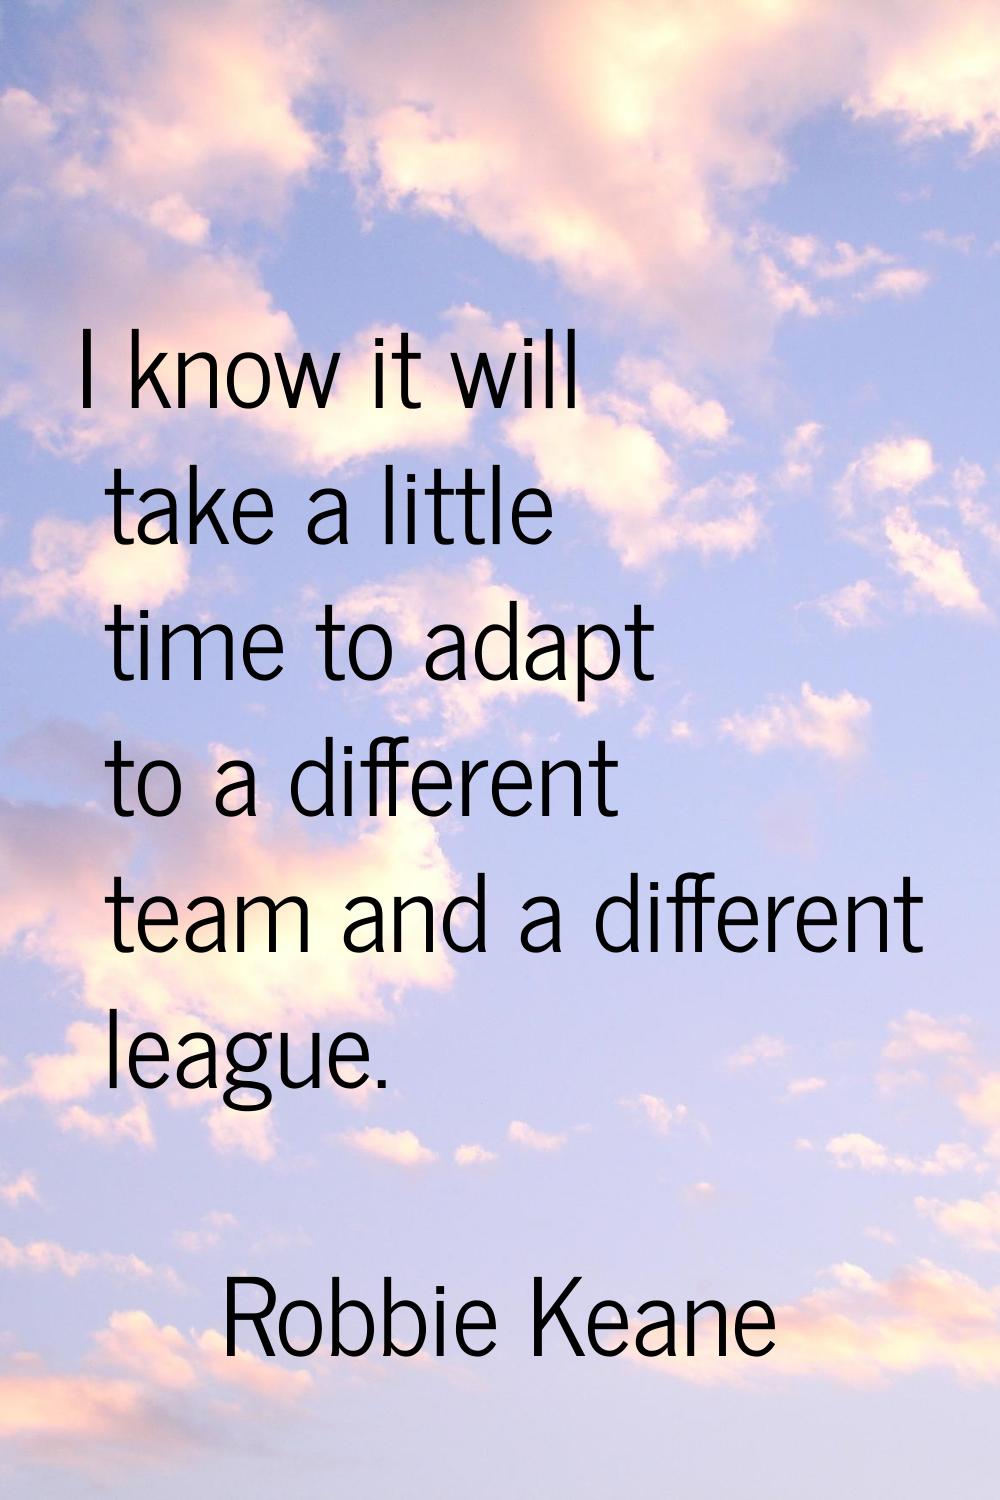 I know it will take a little time to adapt to a different team and a different league.